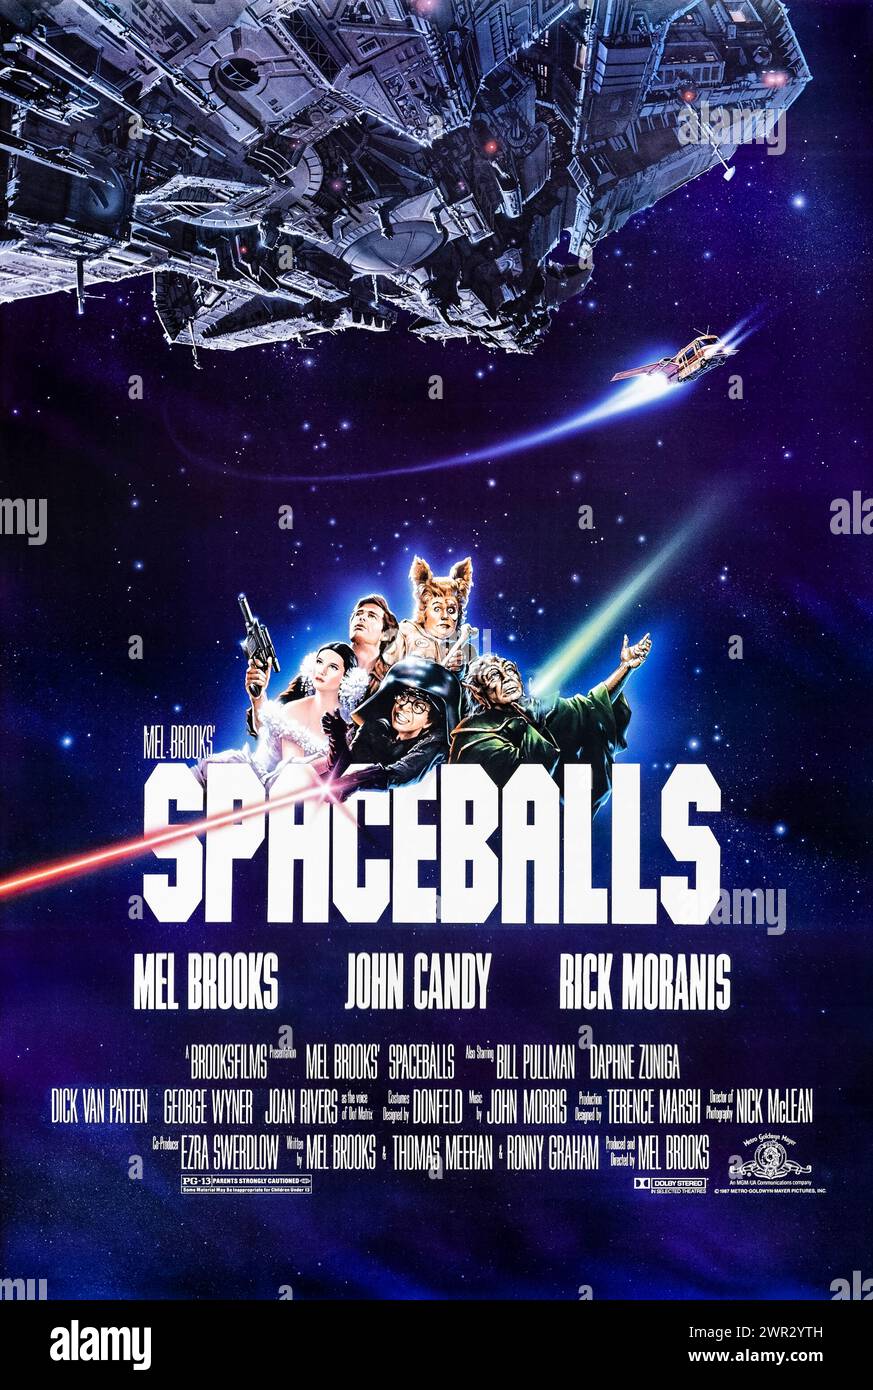 Spaceballs (1987) directed by Mel Brooks and starring Mel Brooks, John Candy and Rick Moranis. Classic sci-fi parody, may the farce be with you! Photograph of an original 1987 US one sheet poster. ***EDITORIAL USE ONLY*** Credit: BFA / Metro-Goldwyn-Mayer Stock Photo